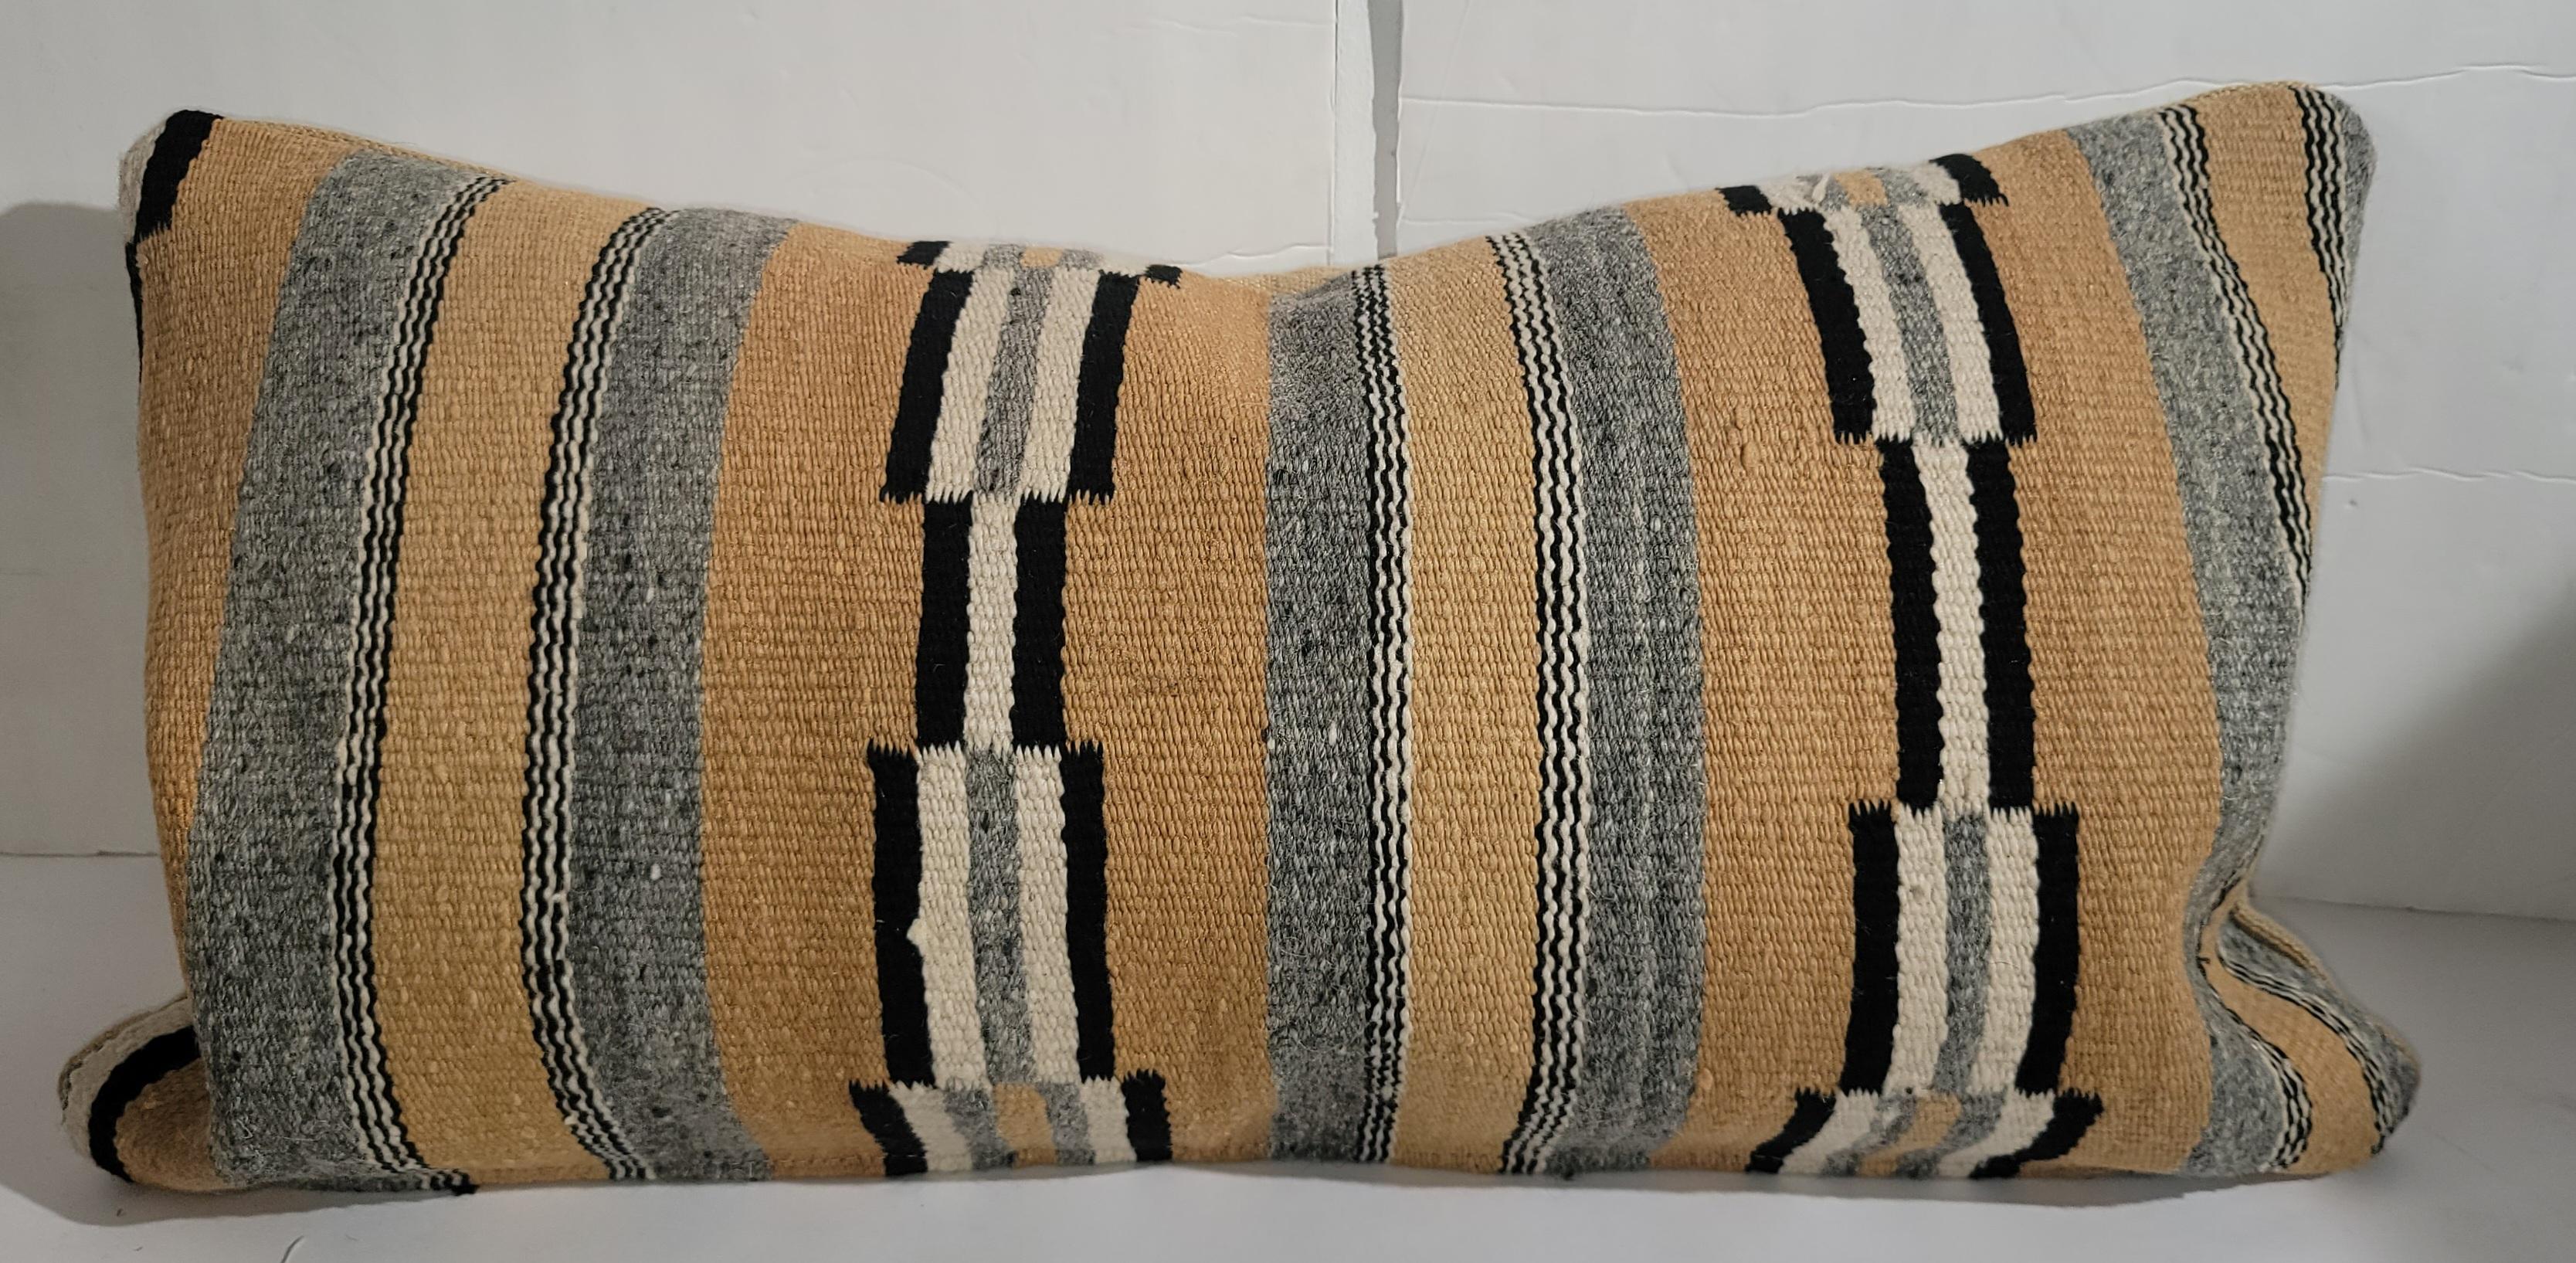 American Pair of Chinle Navajo Indian Weaving Bolster Pillows -2 For Sale